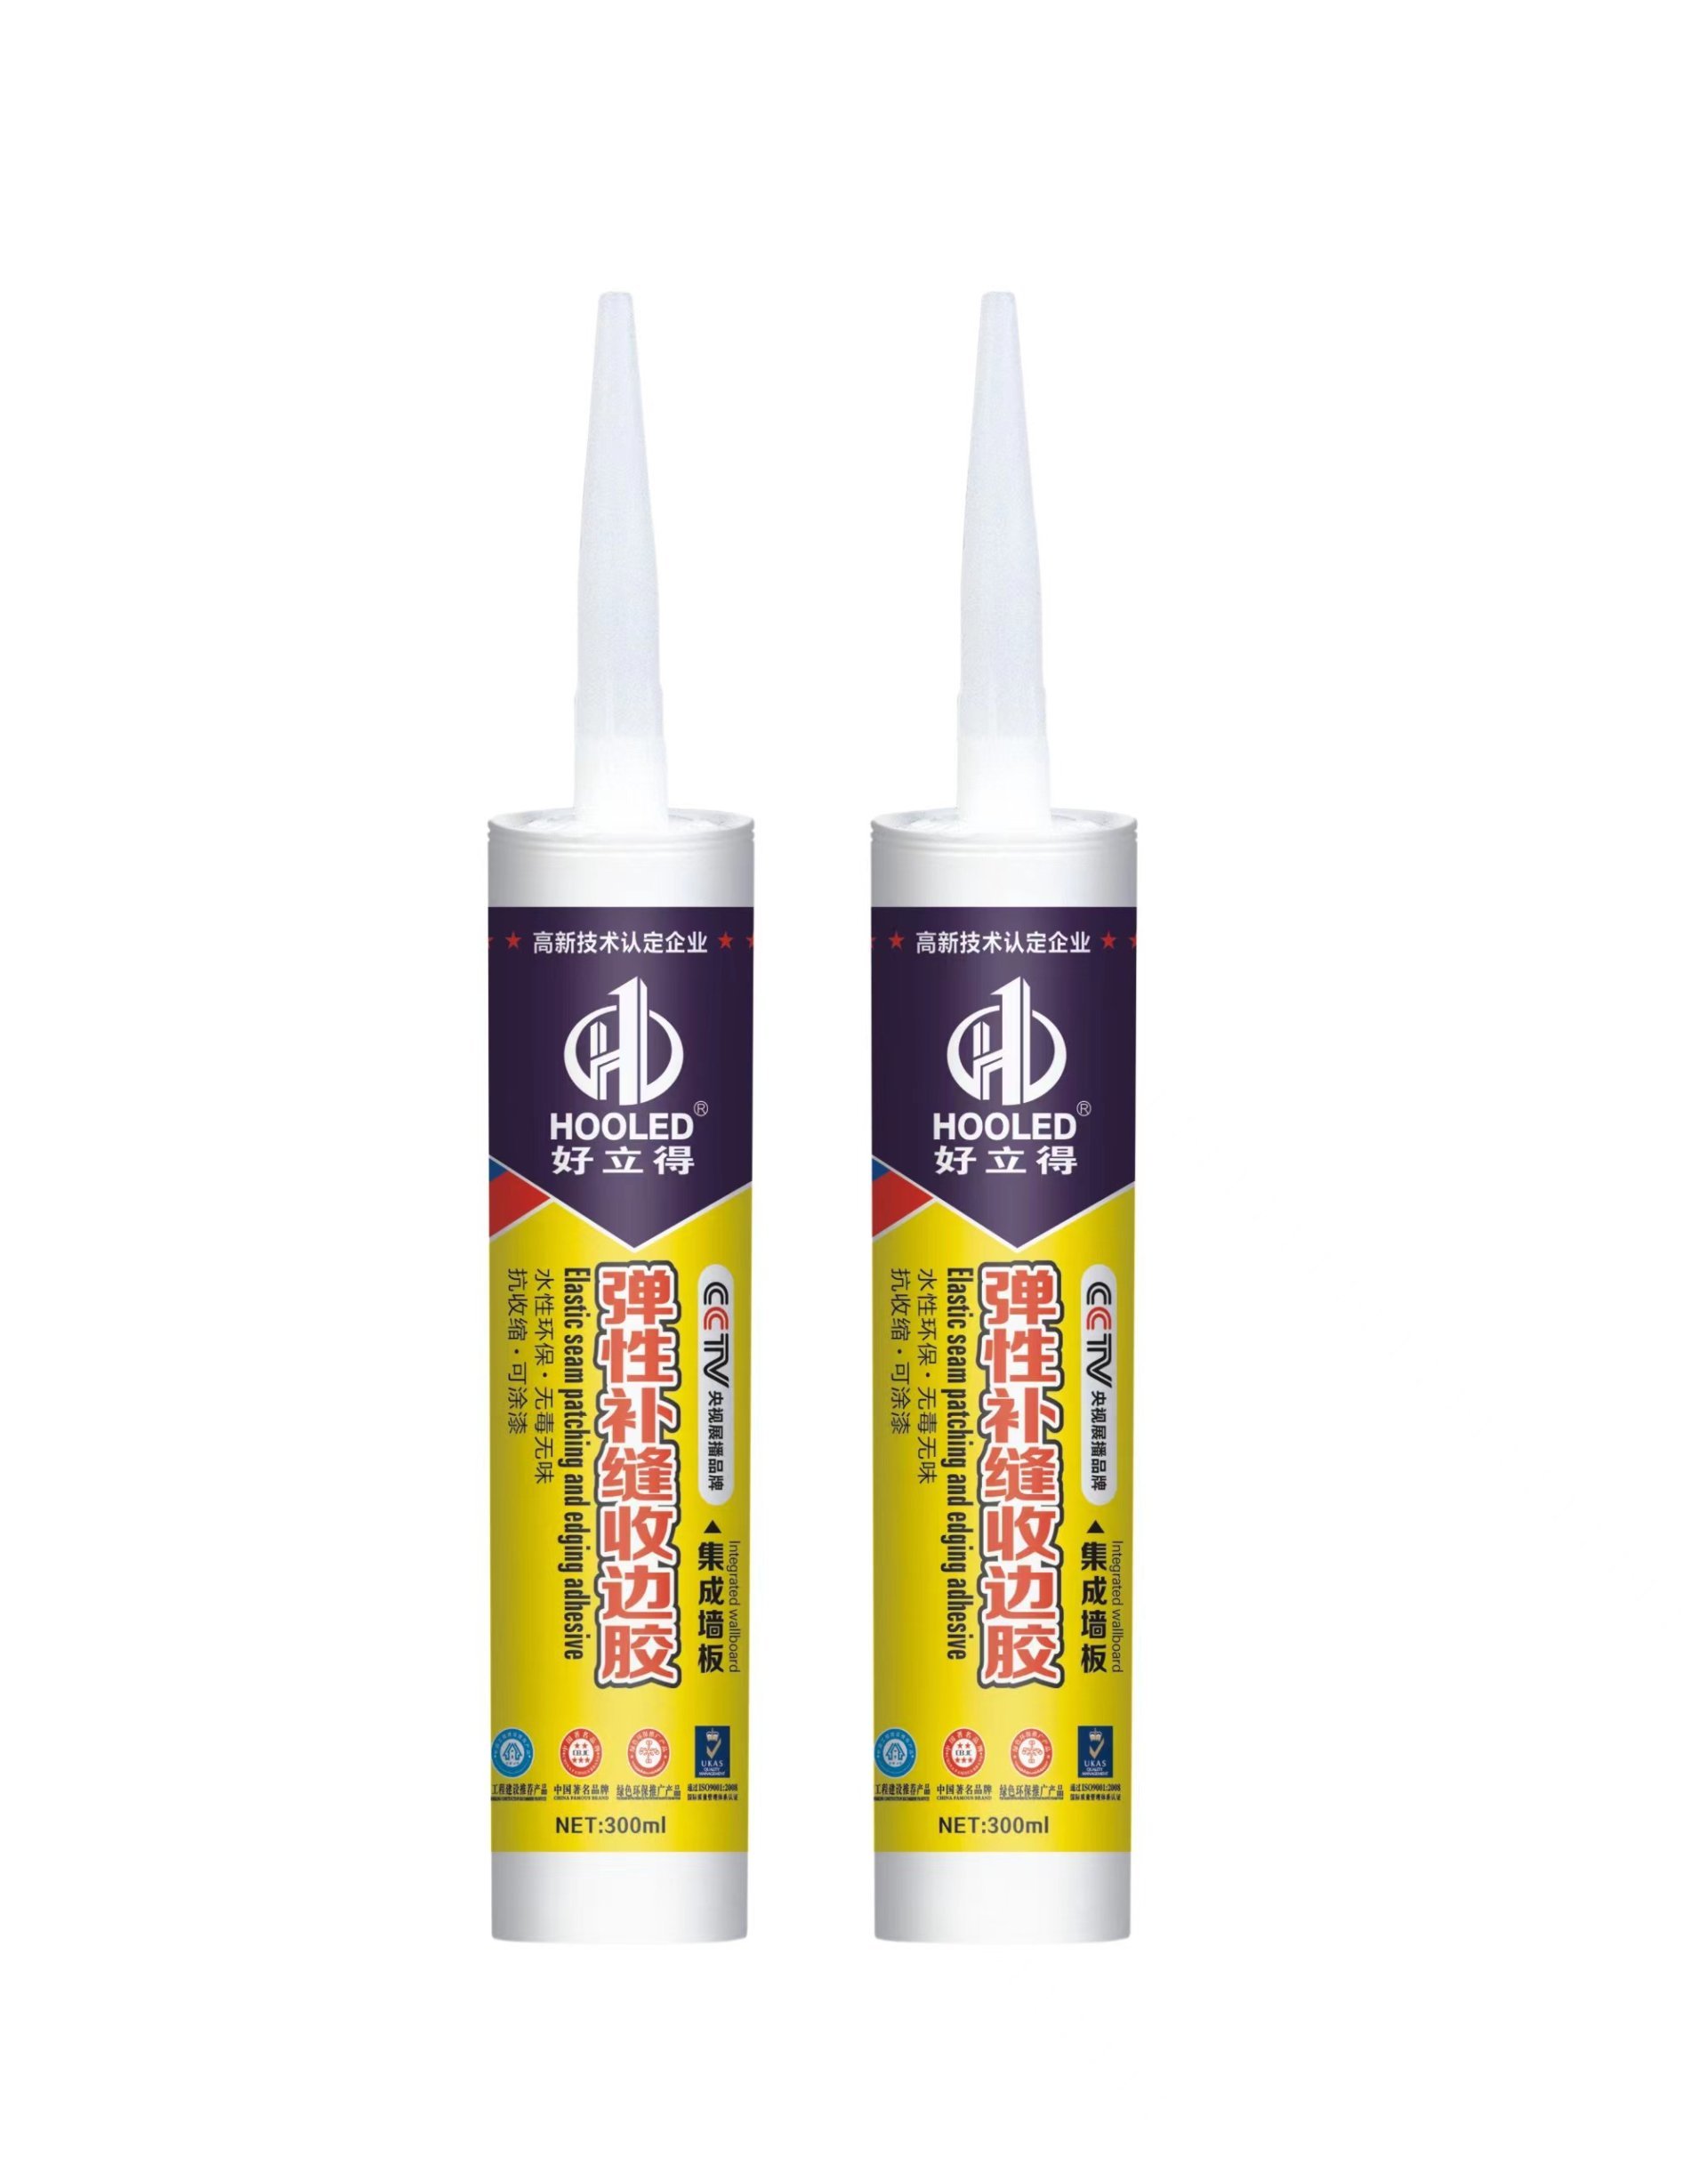 Hooled Elastic Patching and Edging Adhesive